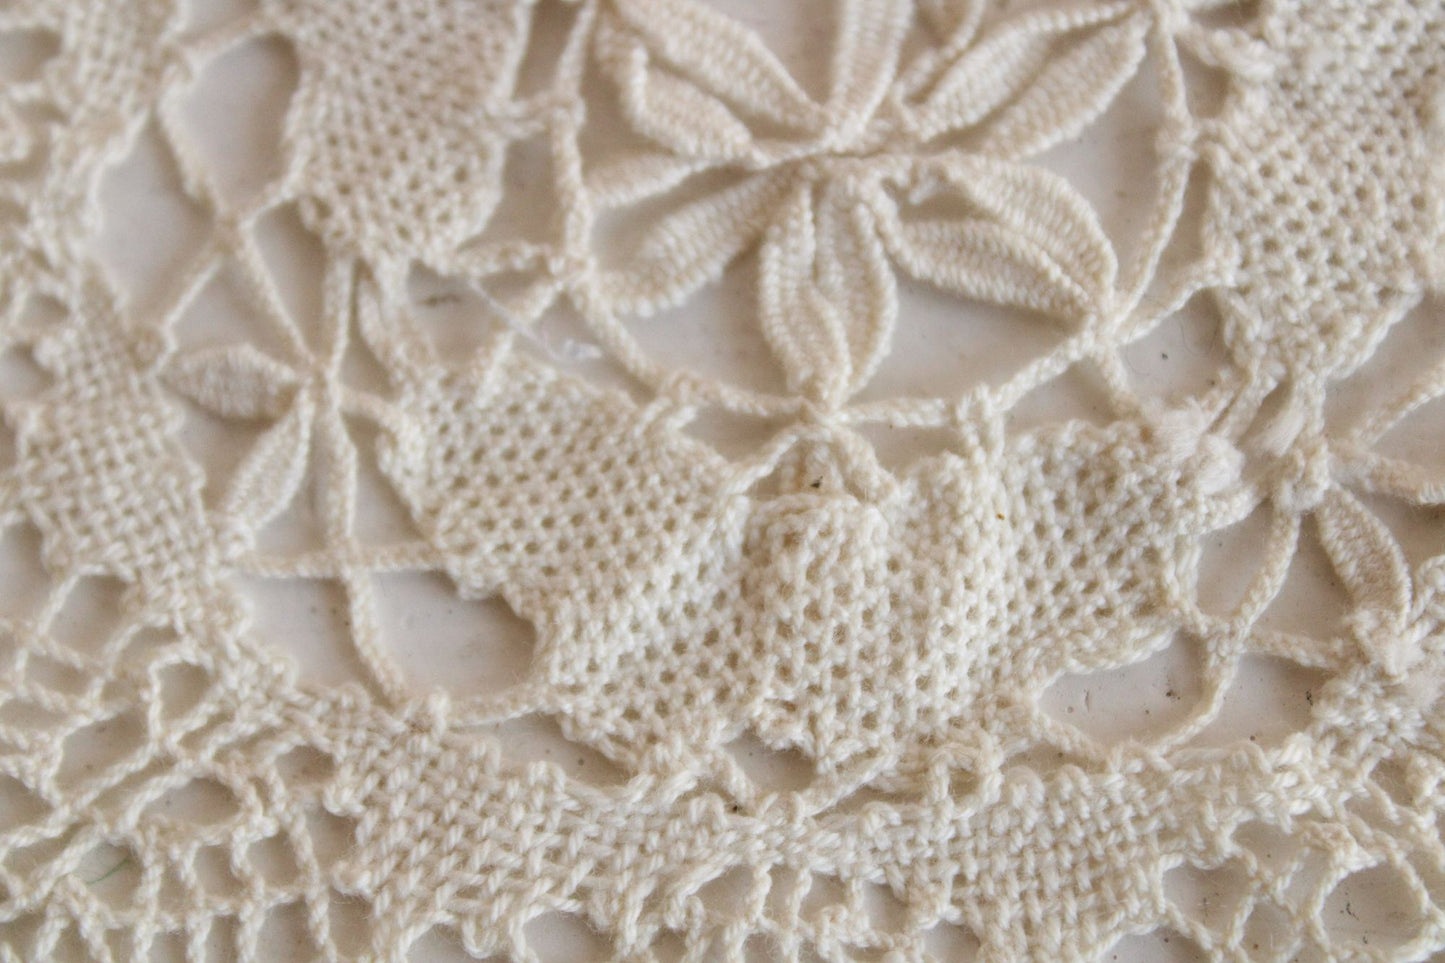 Vintage Doily Set, Ivory Crochet with Butterflies